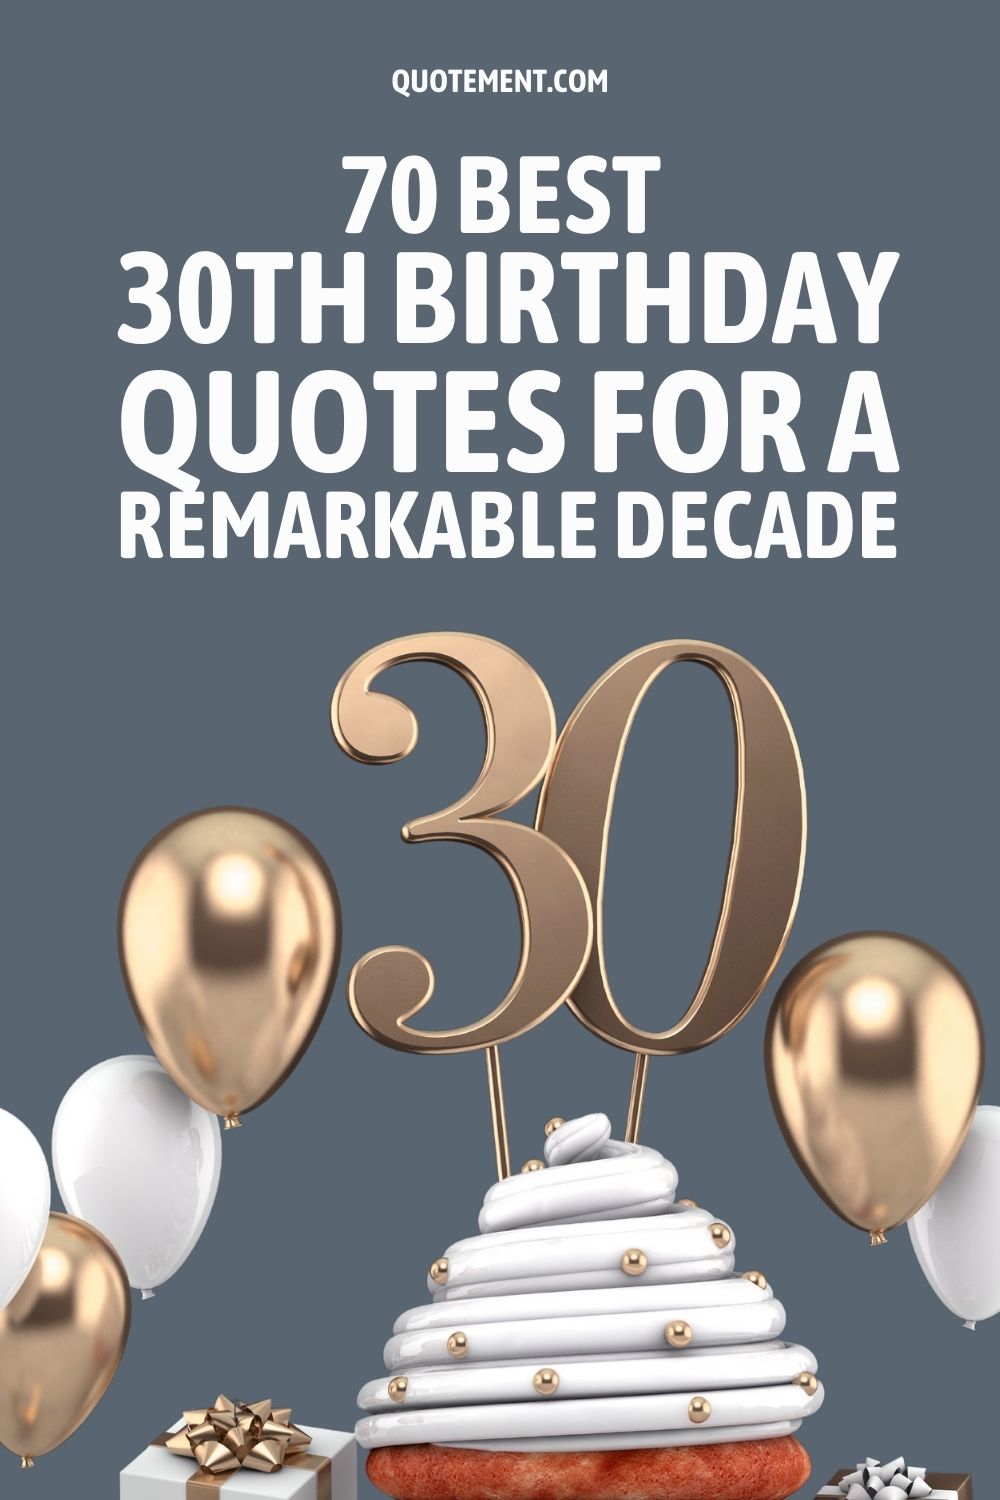 70 Best 30th Birthday Quotes For A Remarkable Decade
